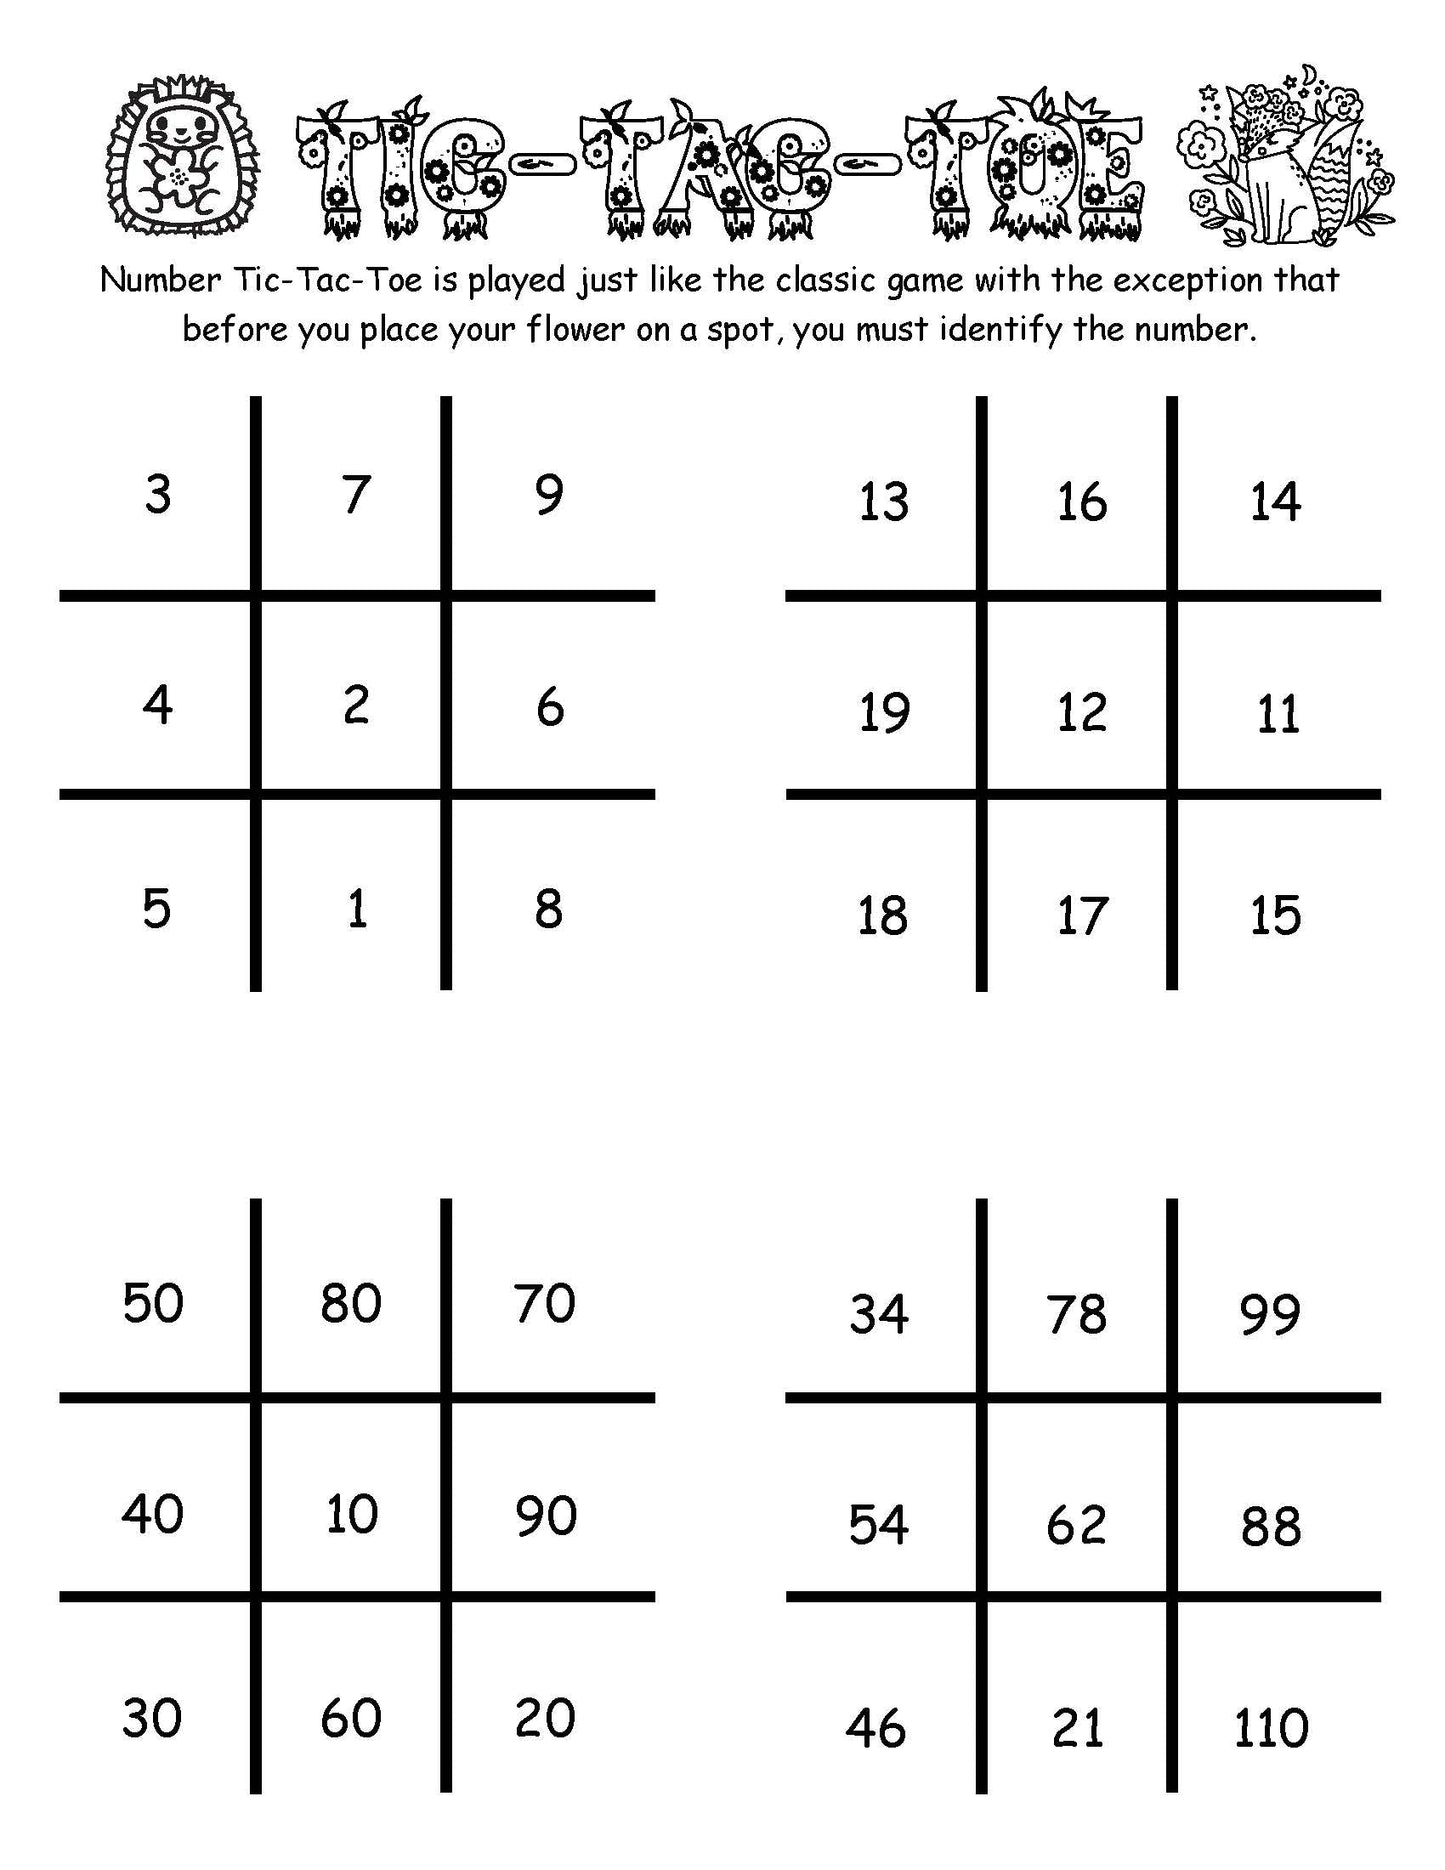 Tic Tac Toe with numbers